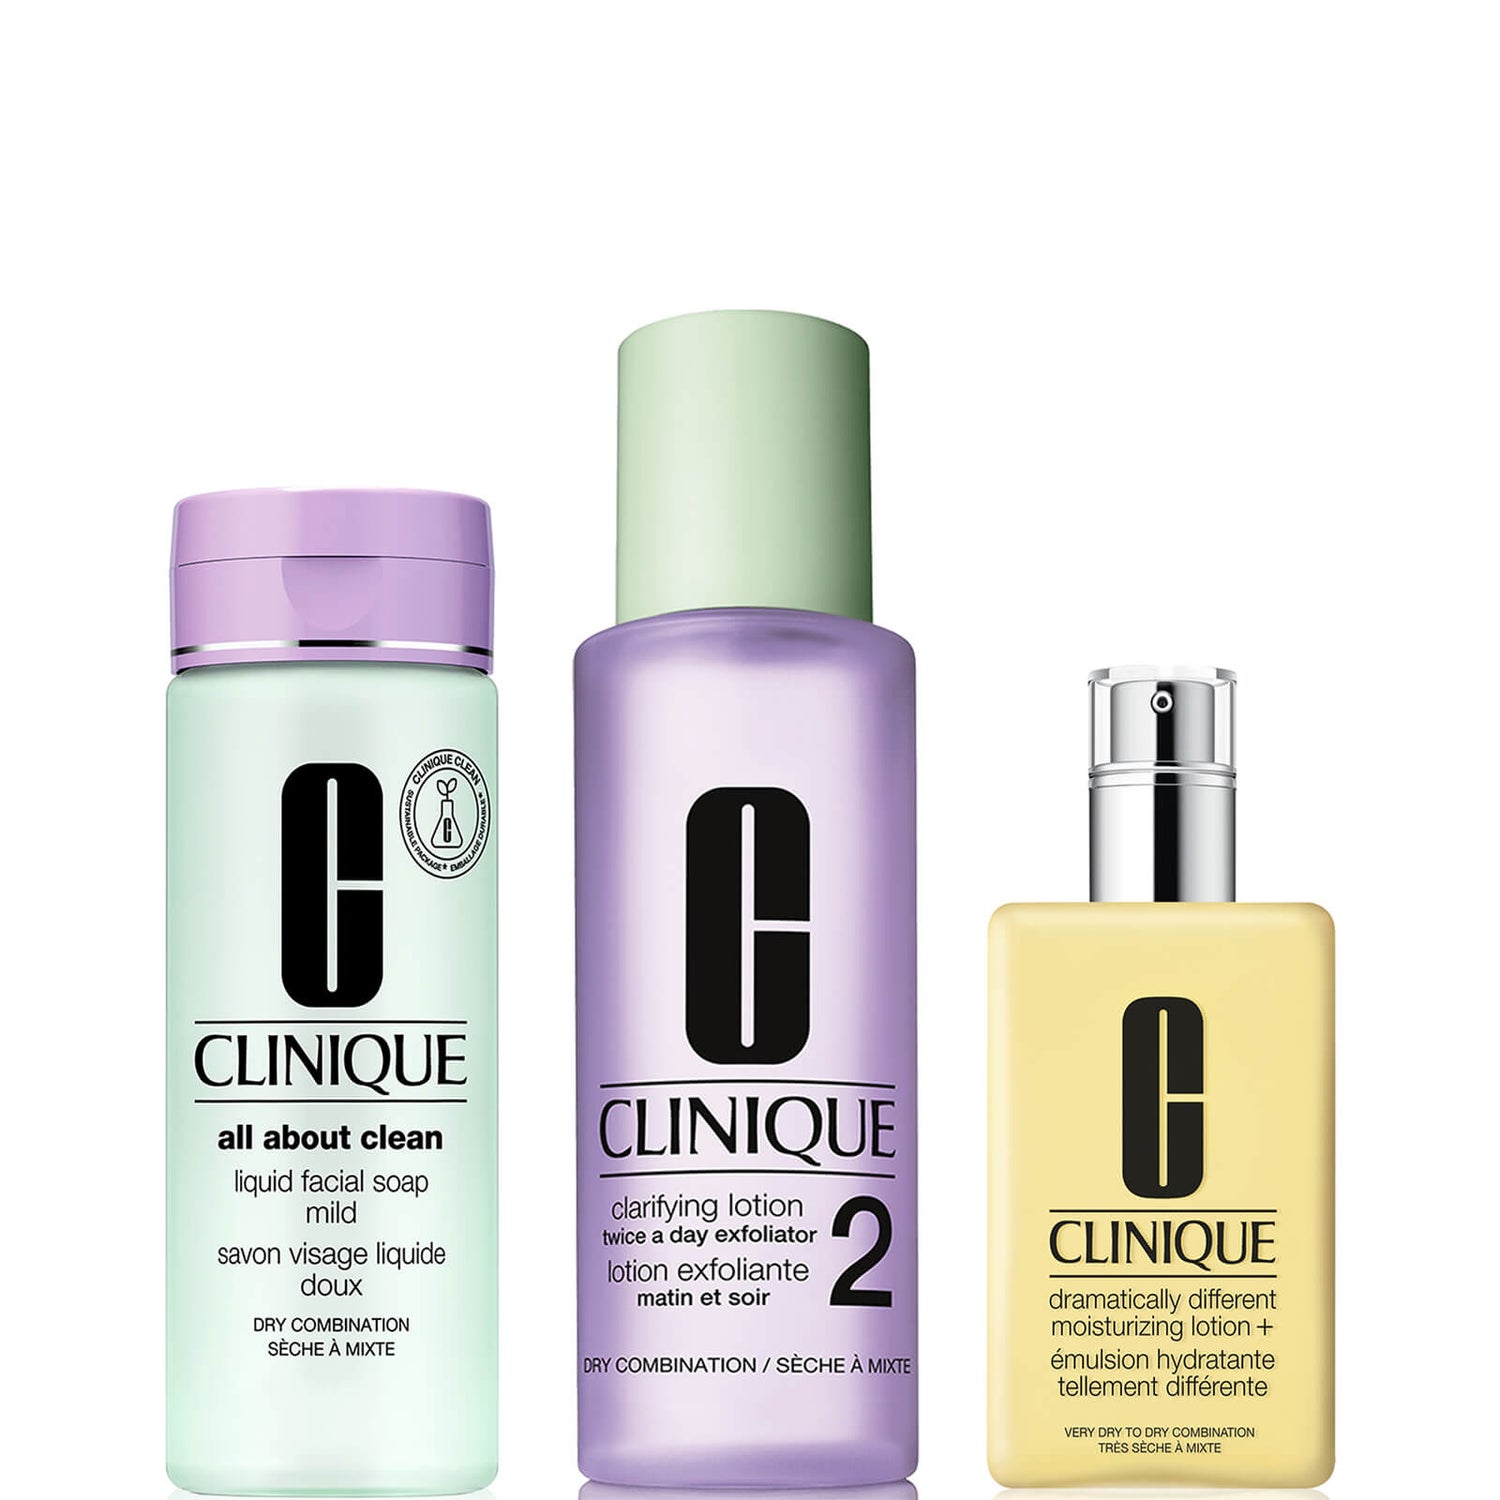 Clinique Morning Skincare Routine Bundle For Dry / Combination Skin (Worth £77.00)